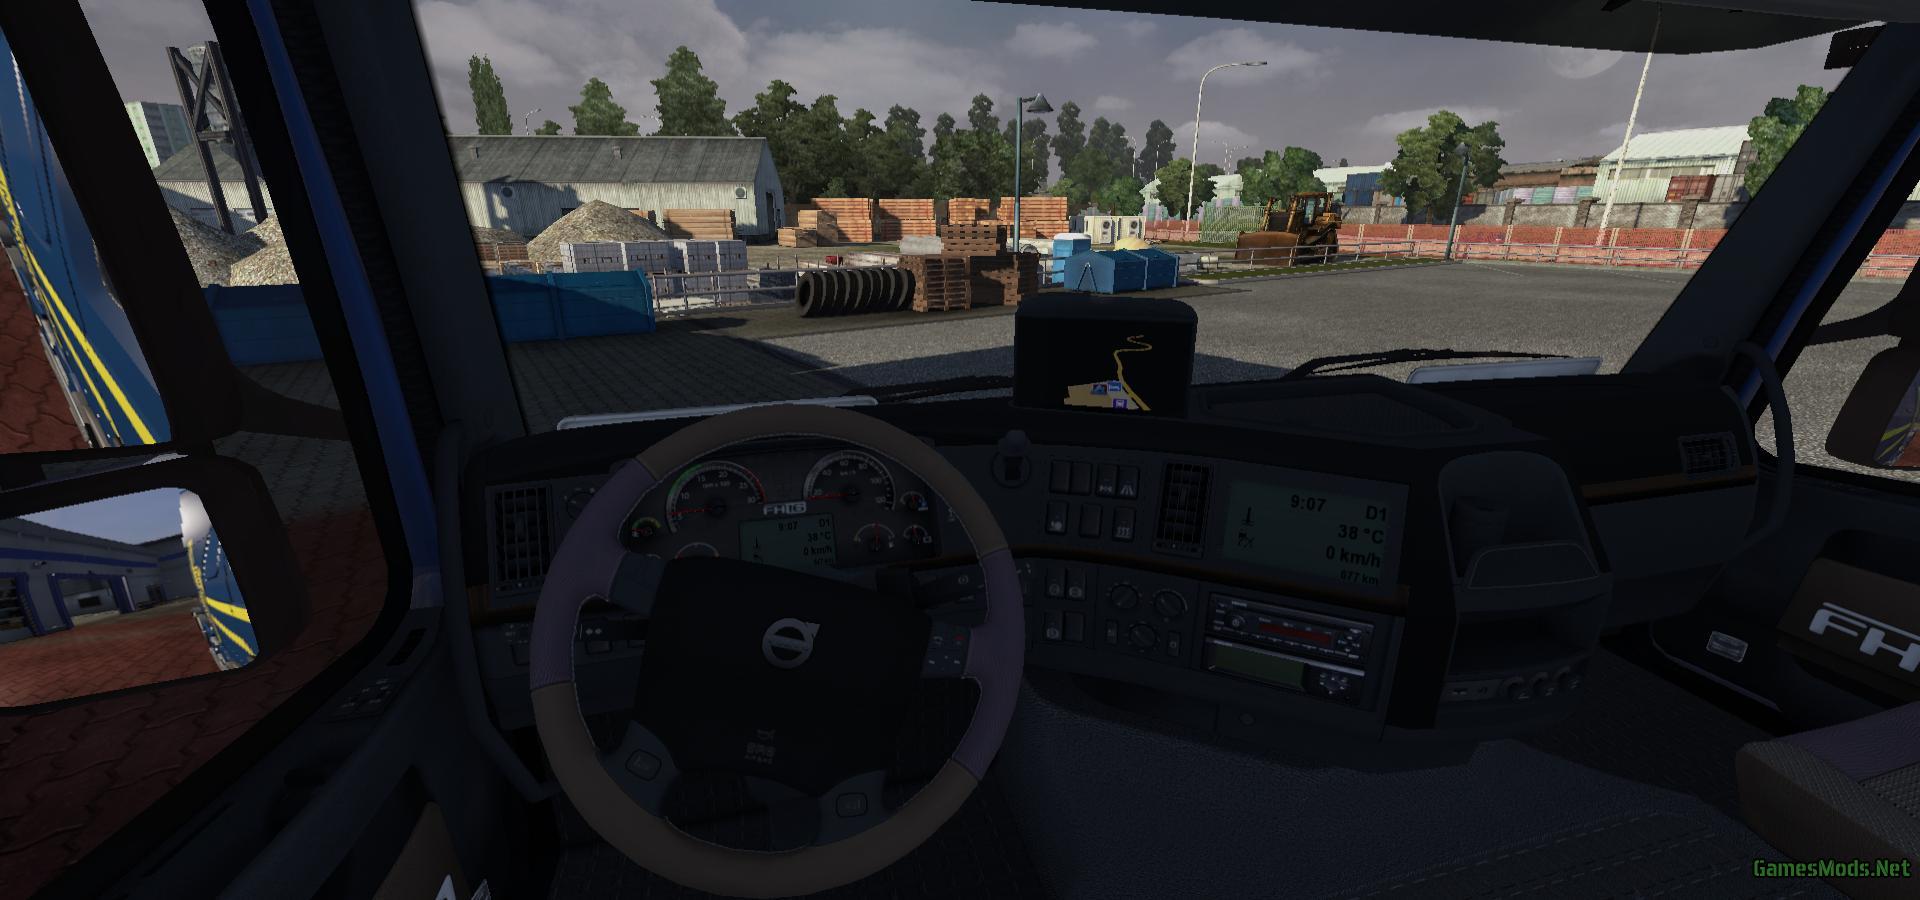 VOLVO FH CLASSIC - DASHBOARD GPS » GamesMods.net - FS19, FS17, ETS 2 mods